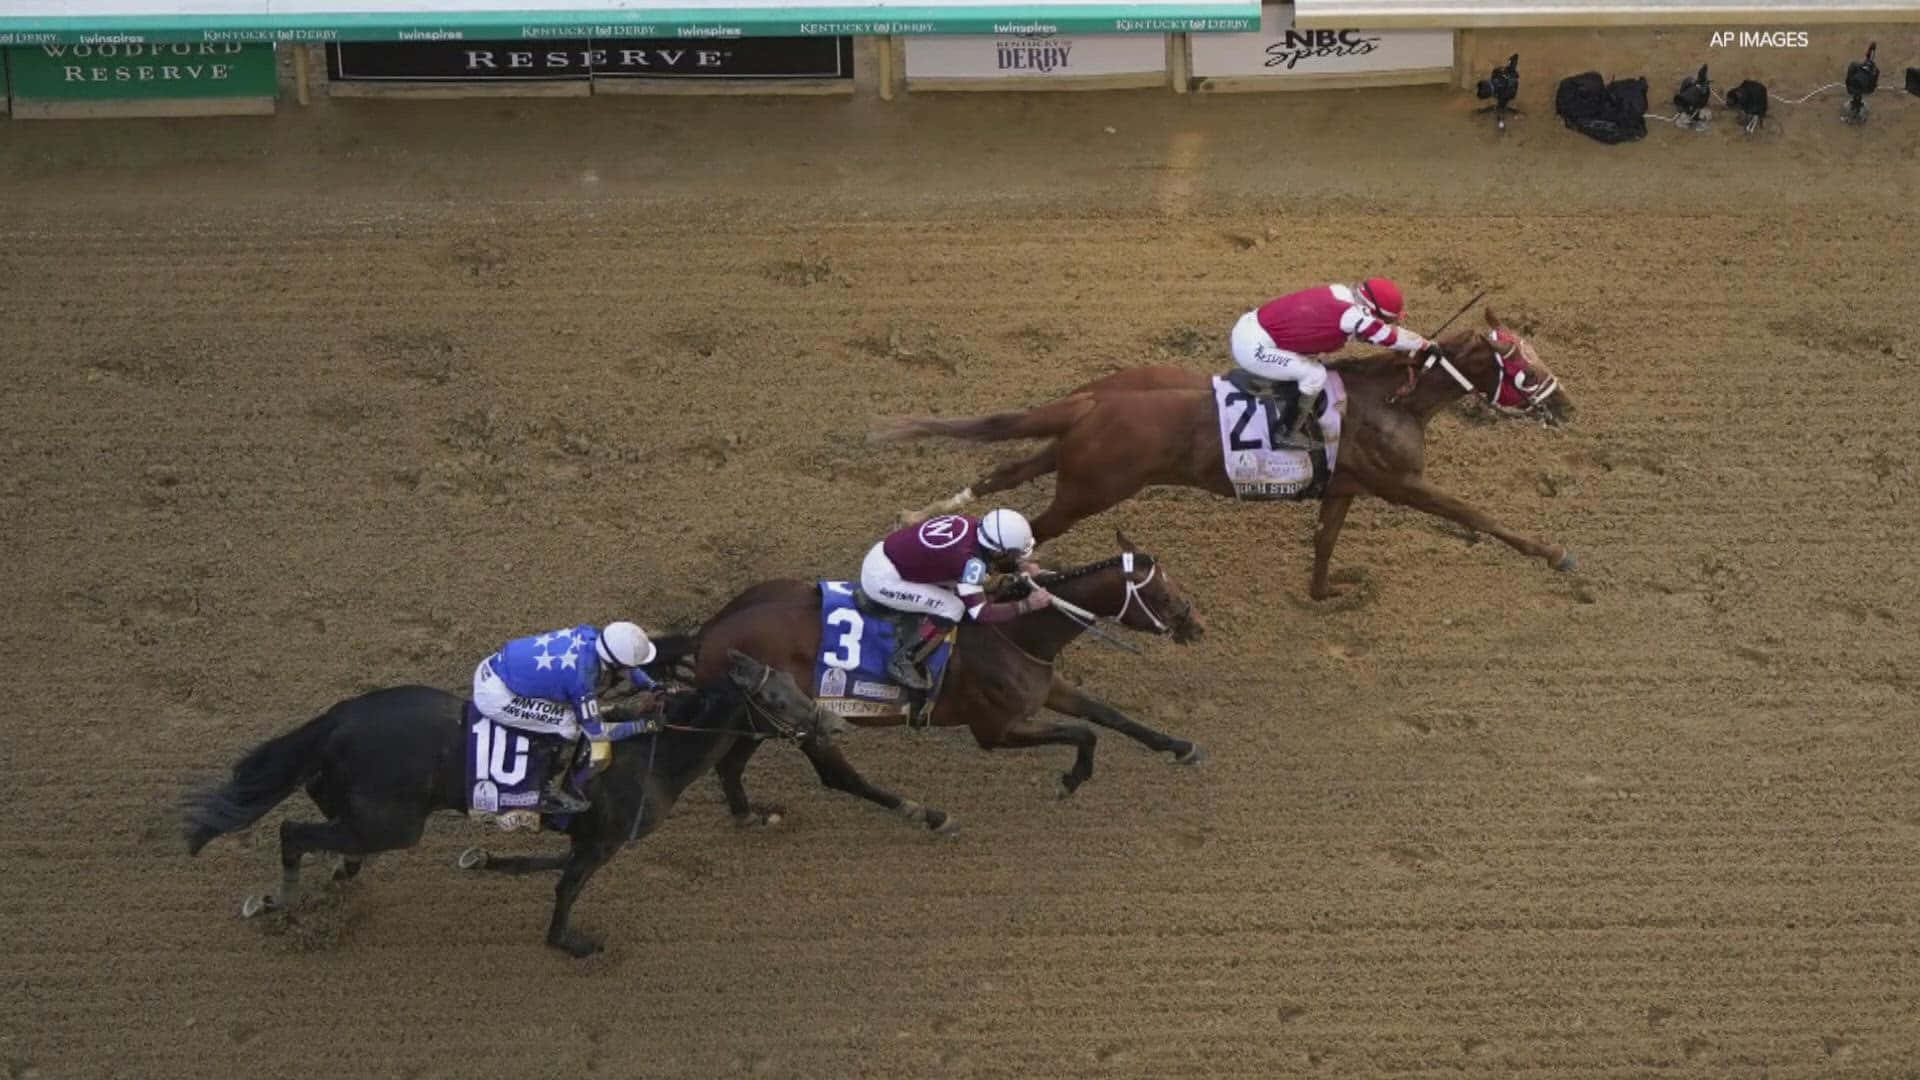 Three Horses Are Racing In A Dirt Track